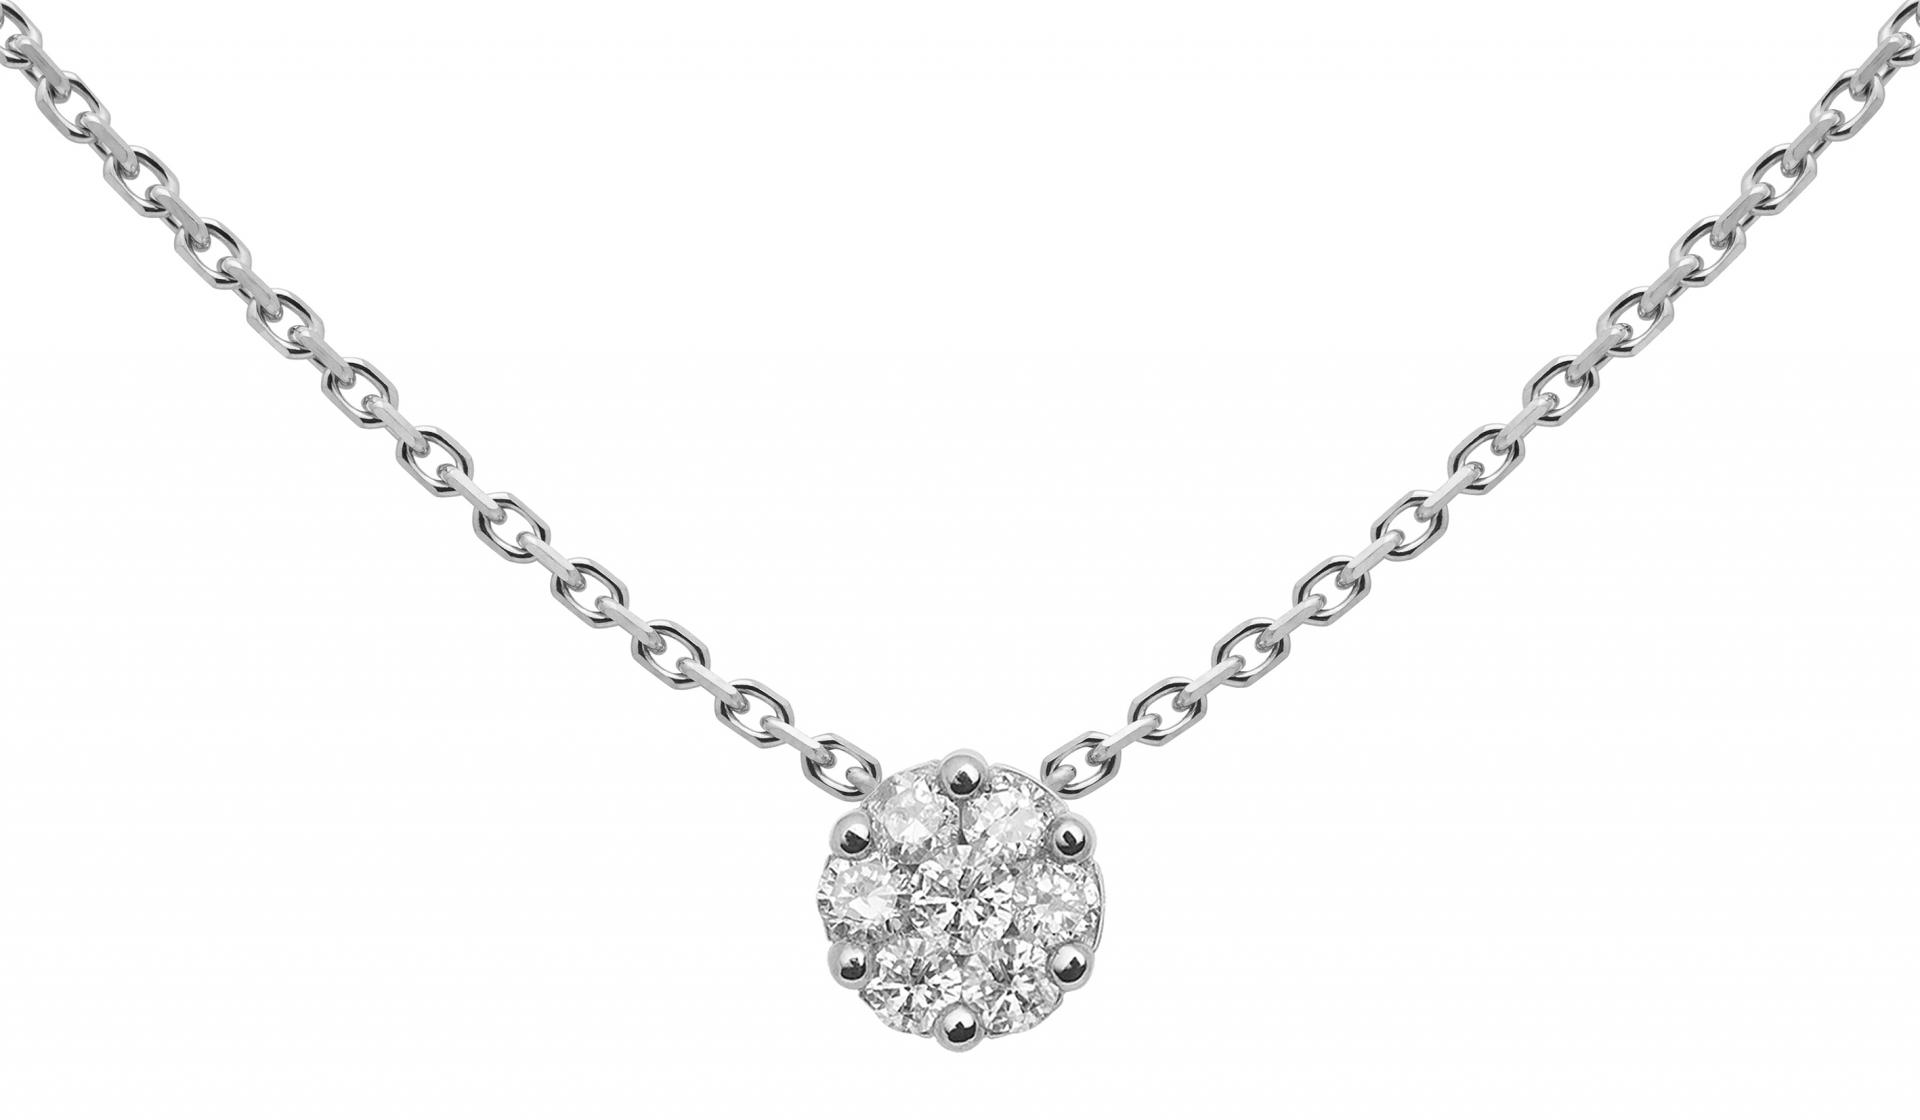 Redline Jewerly - So Illusion - Chain Necklace For Women with 0.10ct Round  Diamond in White Gold Cluster Setting - Redline